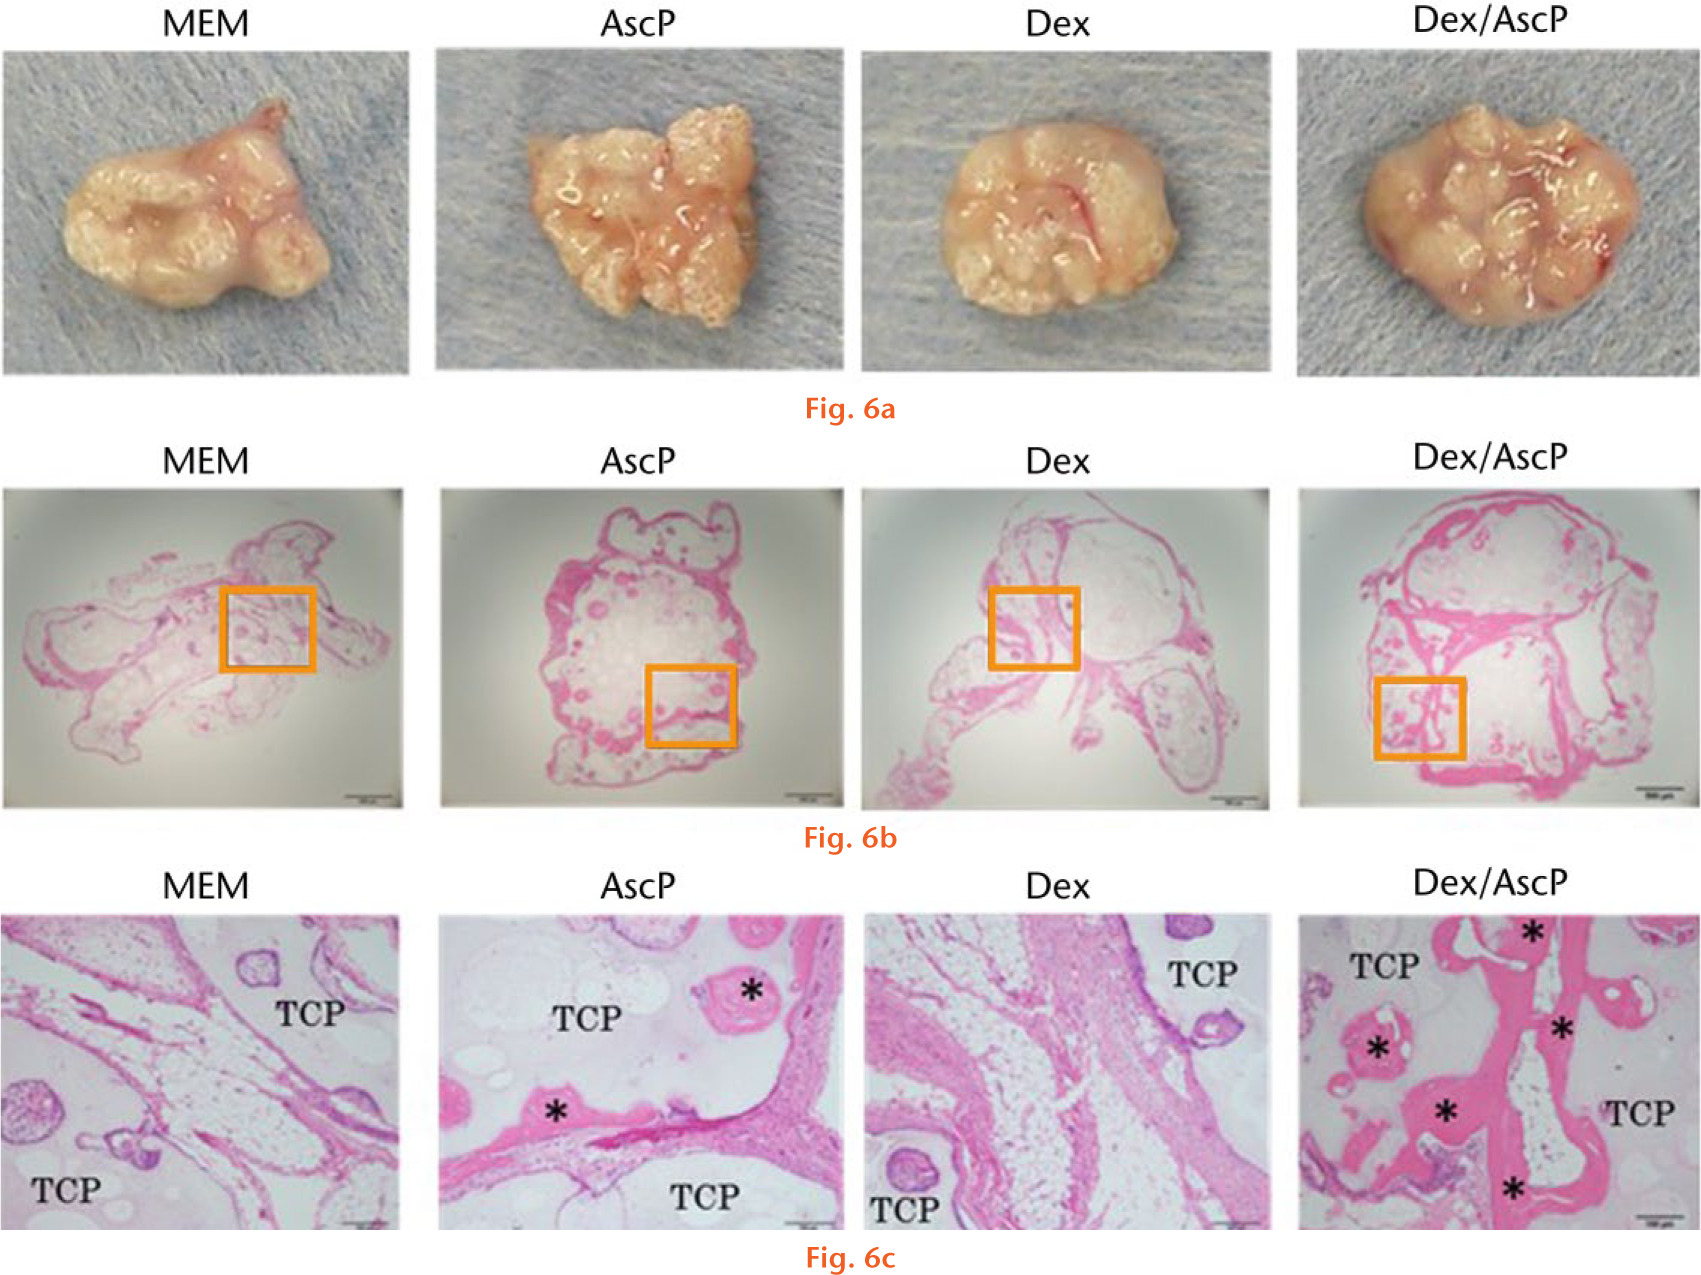  
          Representative images of the samples harvested four weeks after transplantation: a) macroscopic observation indicated that the transplanted β-tricalcium phosphate (TCP) scaffolds aggregated into a single lump in the dexamethasone (Dex)/ascorbic acid phosphate (AscP) group; b) and c) haematoxylin and eosin stained sections showed remarkable bridging bone formation between the β-TCP scaffolds in the Dex/AscP group. The panels in (c) are higher magnification views of the rectangular areas indicated in (b) (*bone tissue; bar, 200 μm).
        